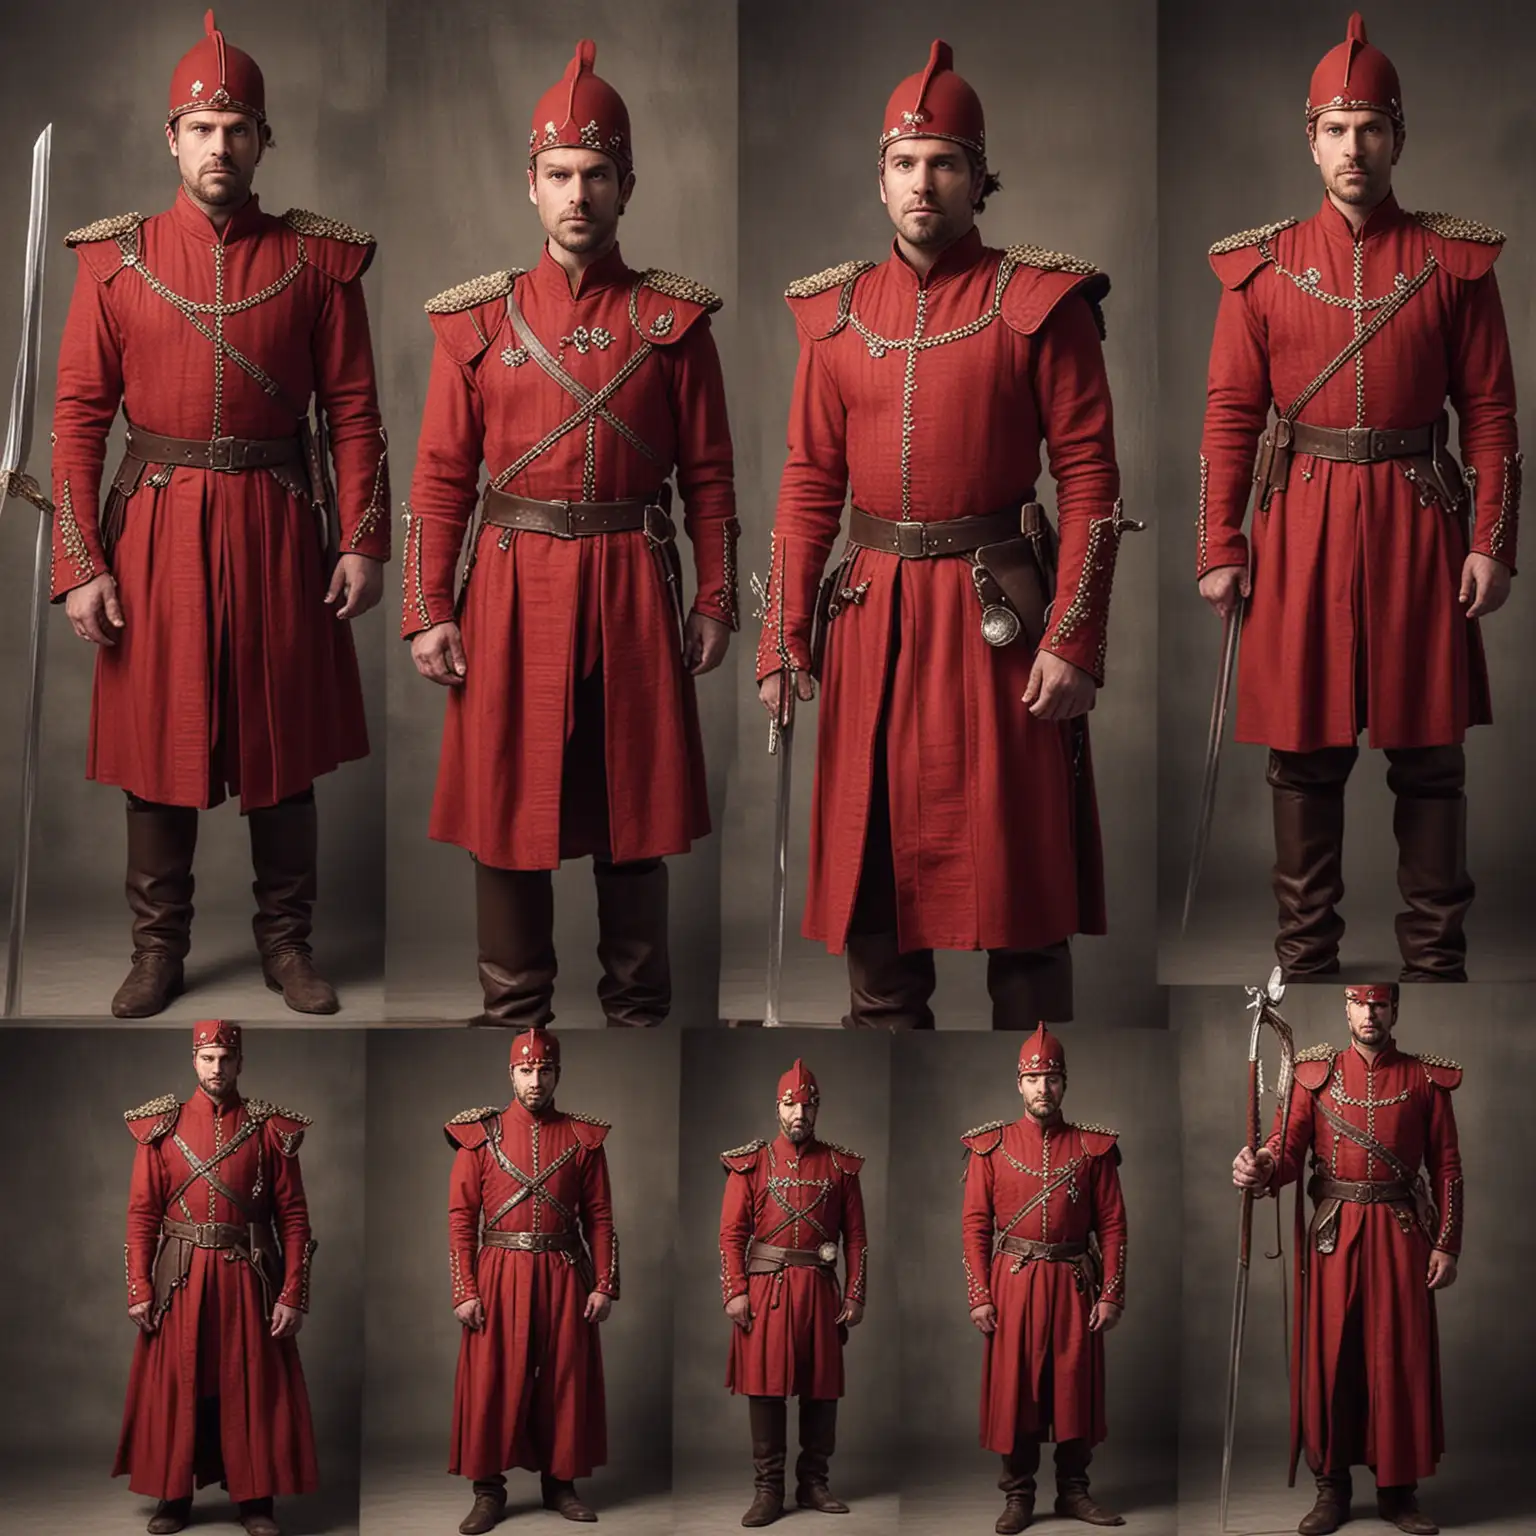 Majestic Red Kingsguard Outfits Inspired by Game of Thrones